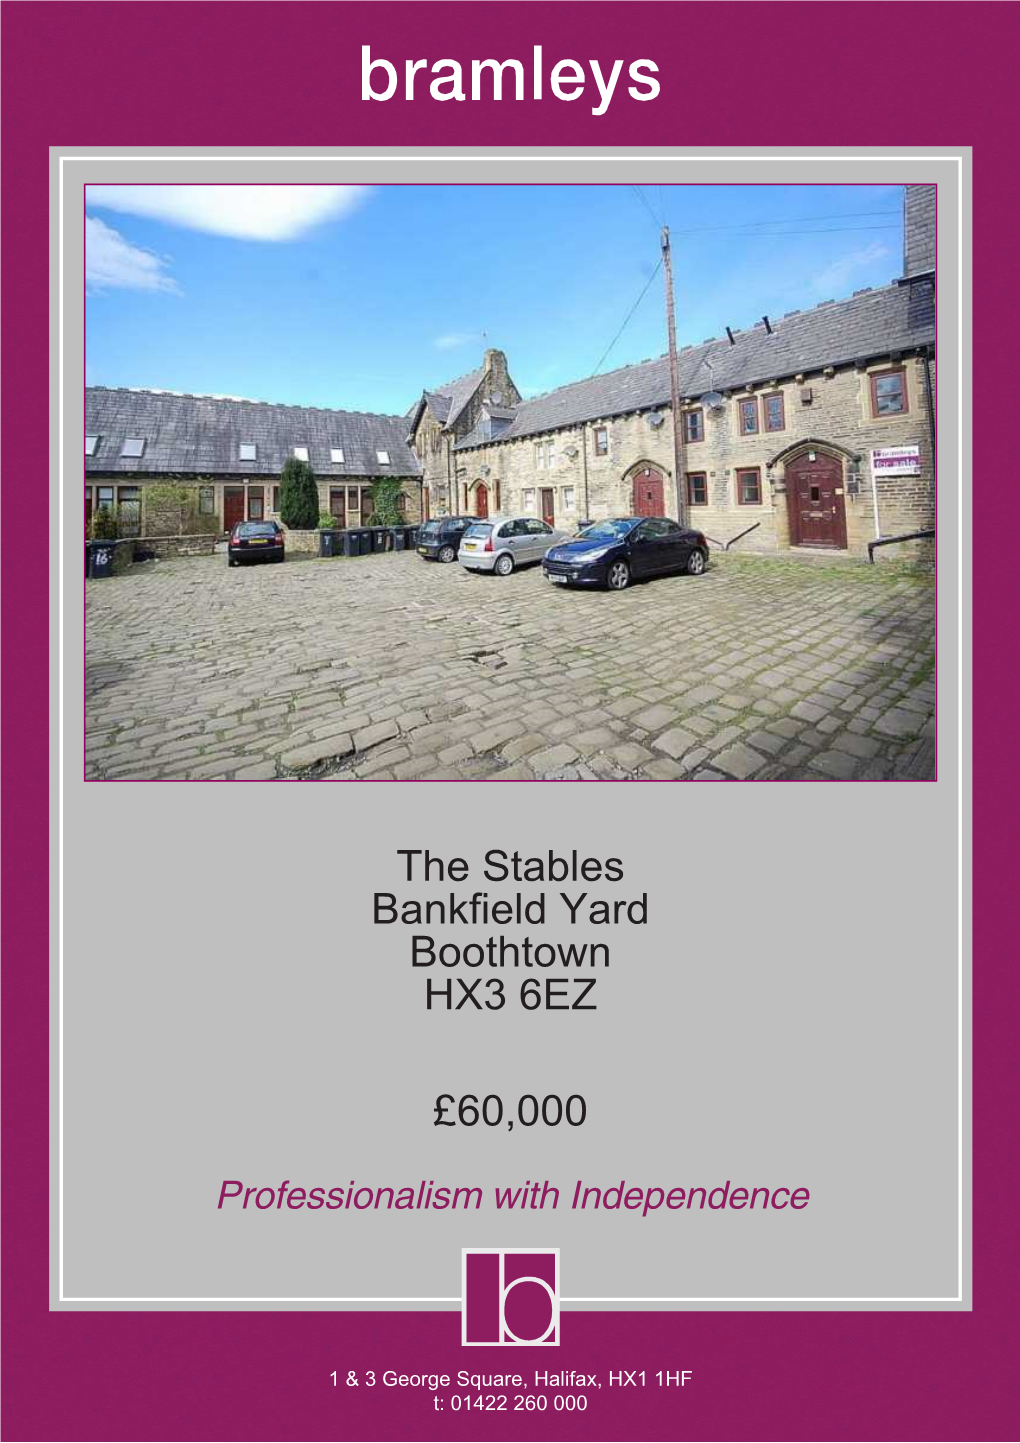 The Stables Bankfield Yard Boothtown HX3 6EZ £60,000